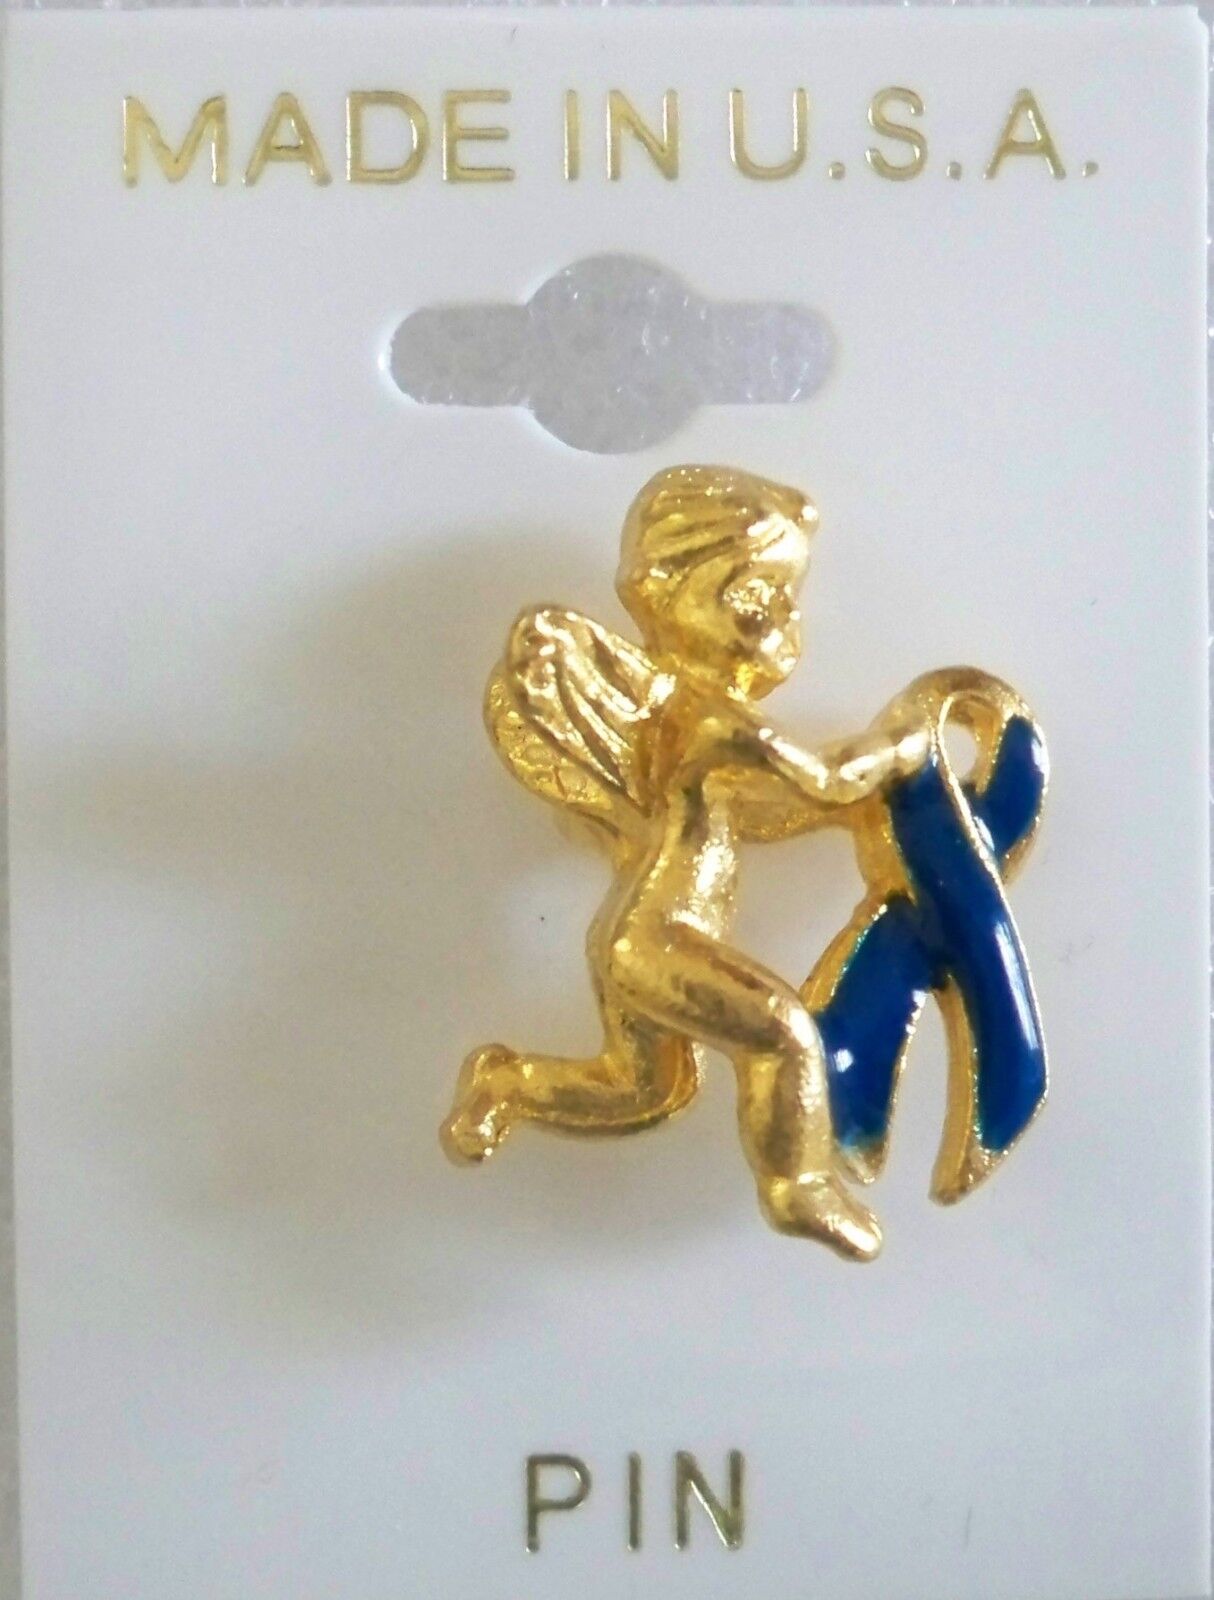 Colon Cancer Awareness blue ribbon running angel pin,gold plated,made in USA